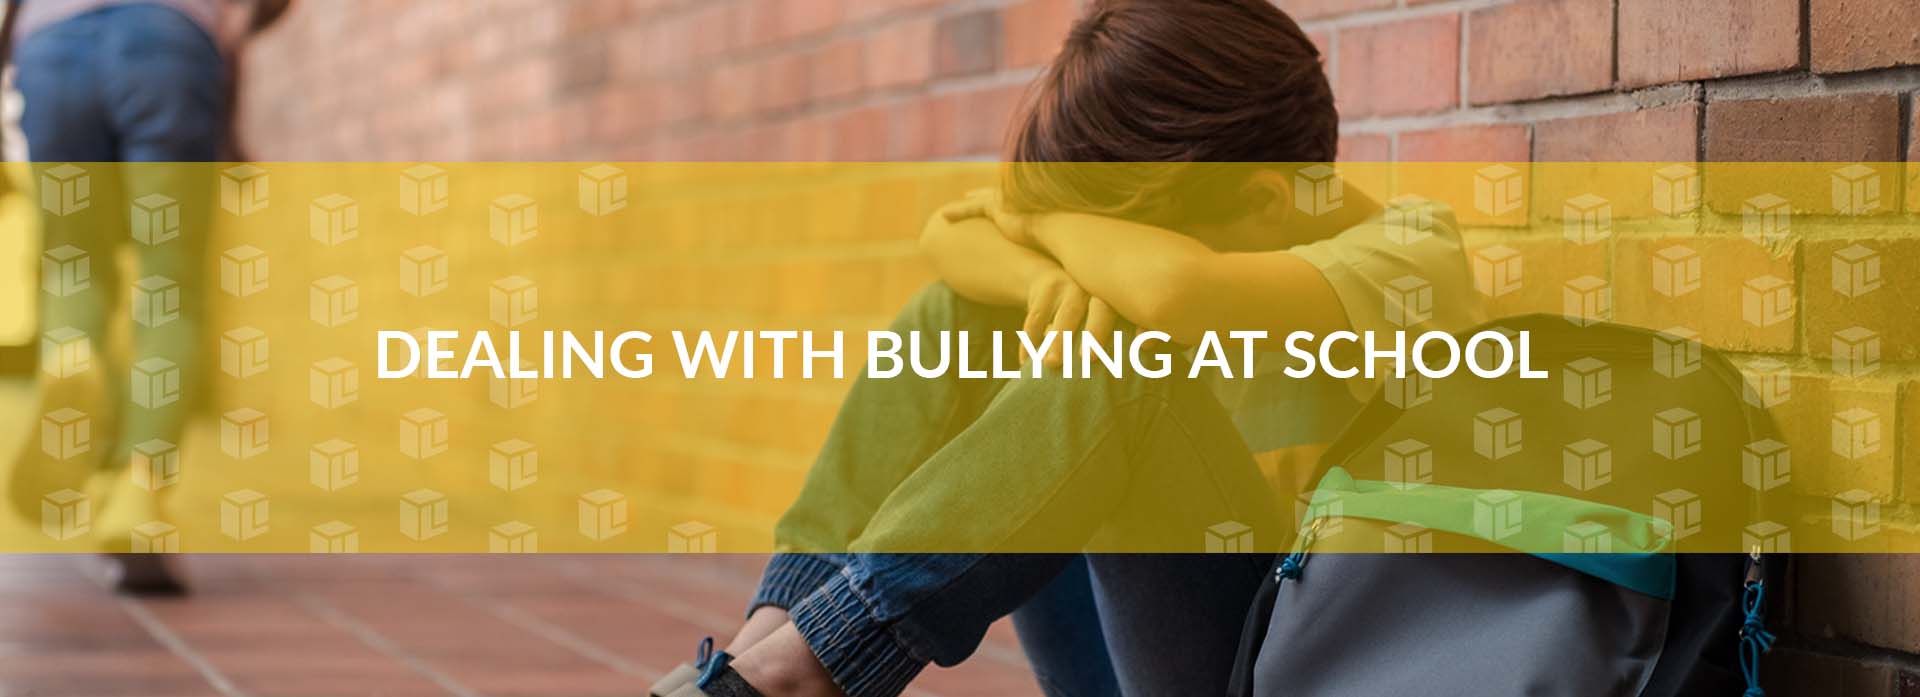 Dealing With Bullying At School